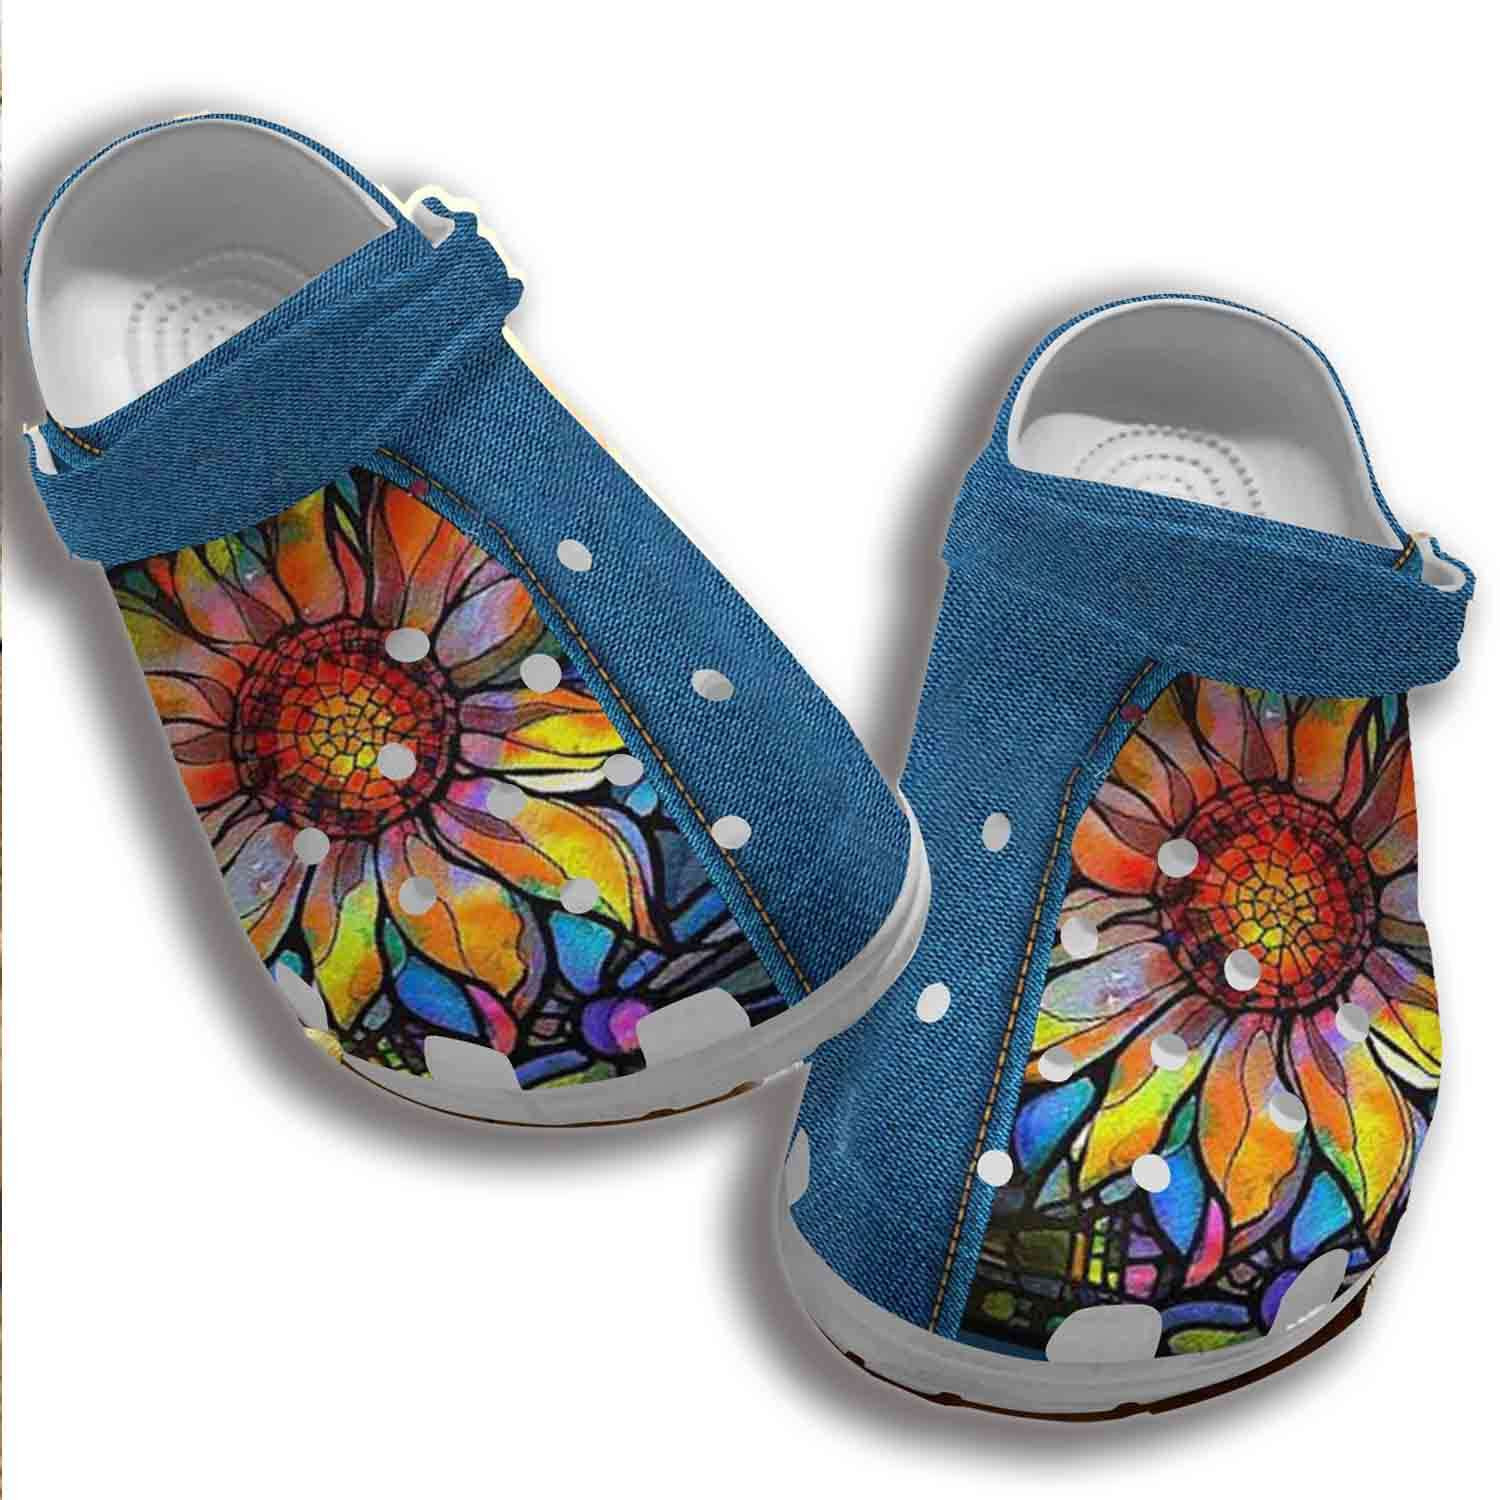 The Colorful Natural Sunflower Hippie Crocs Crocband Clog Shoes